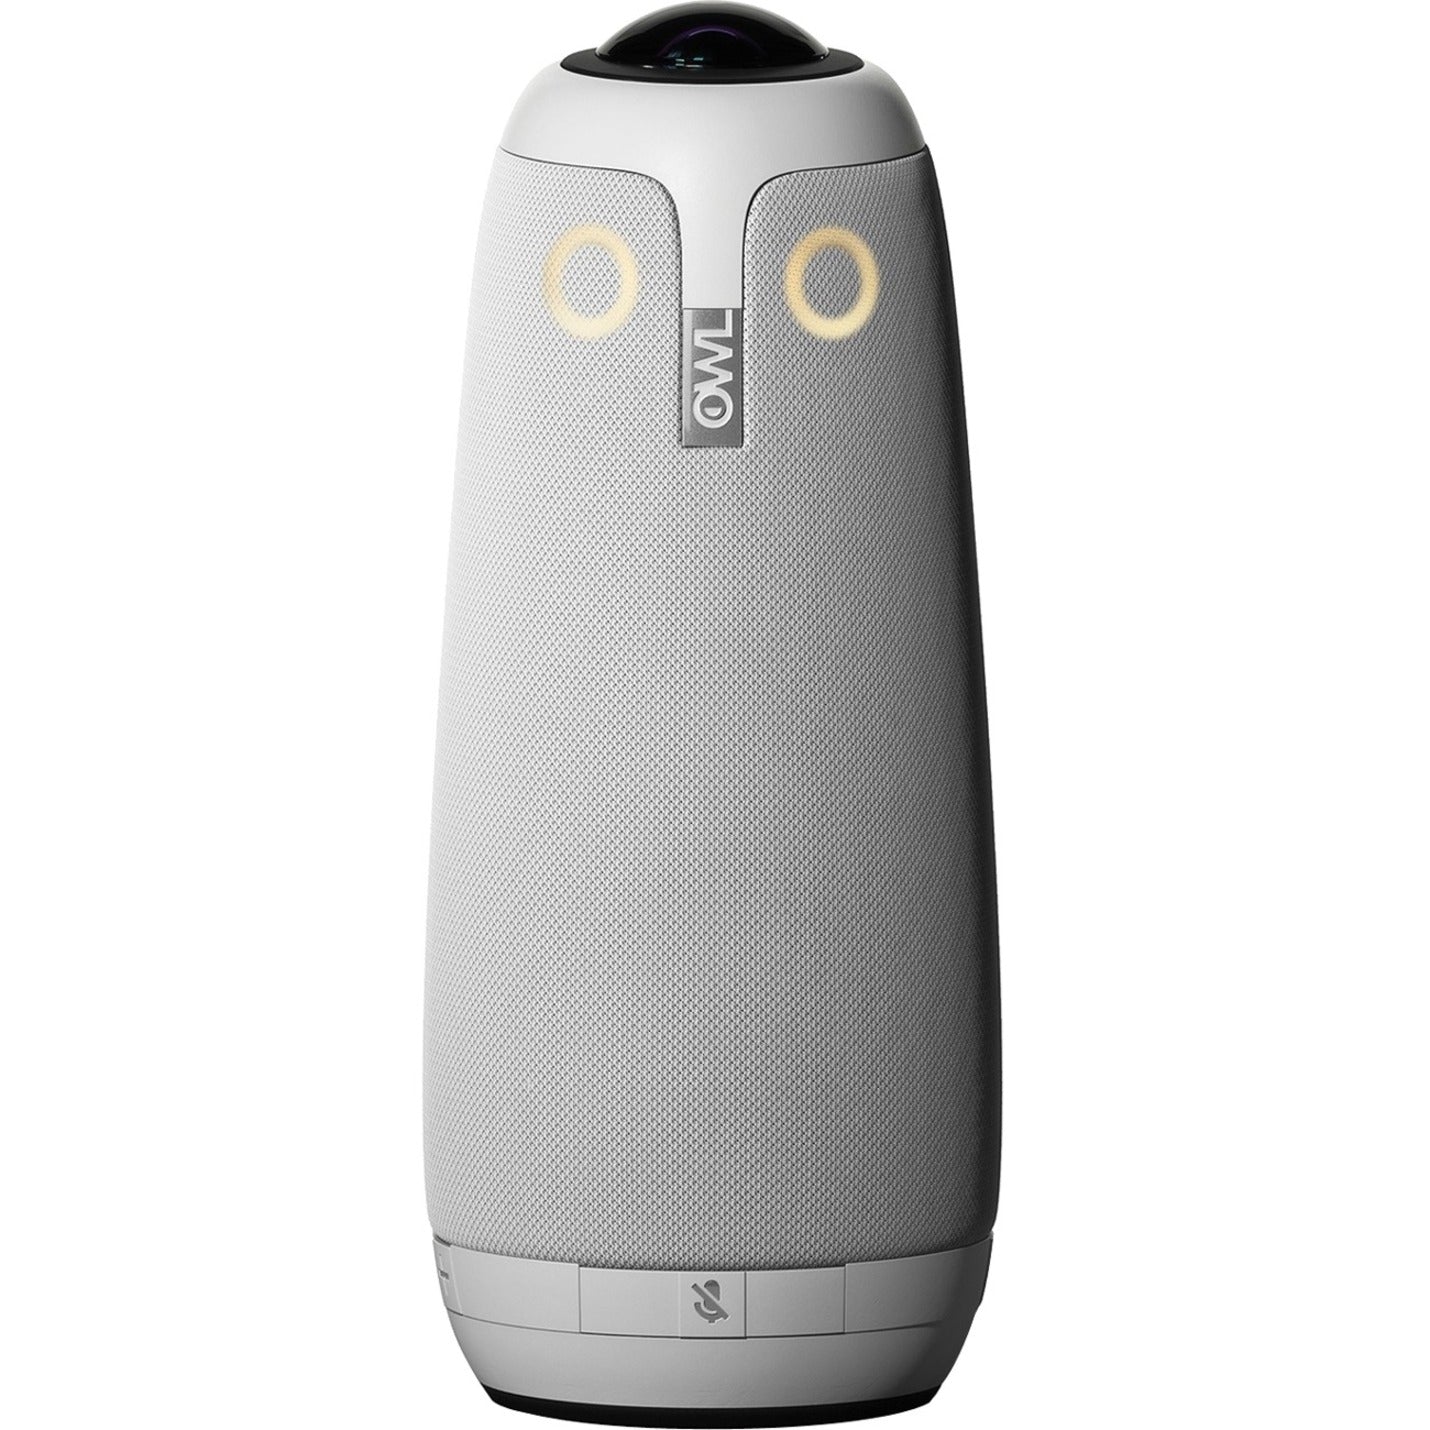 Owl Labs MTW200-1000 Meeting Owl Pro Video Conferencing Camera